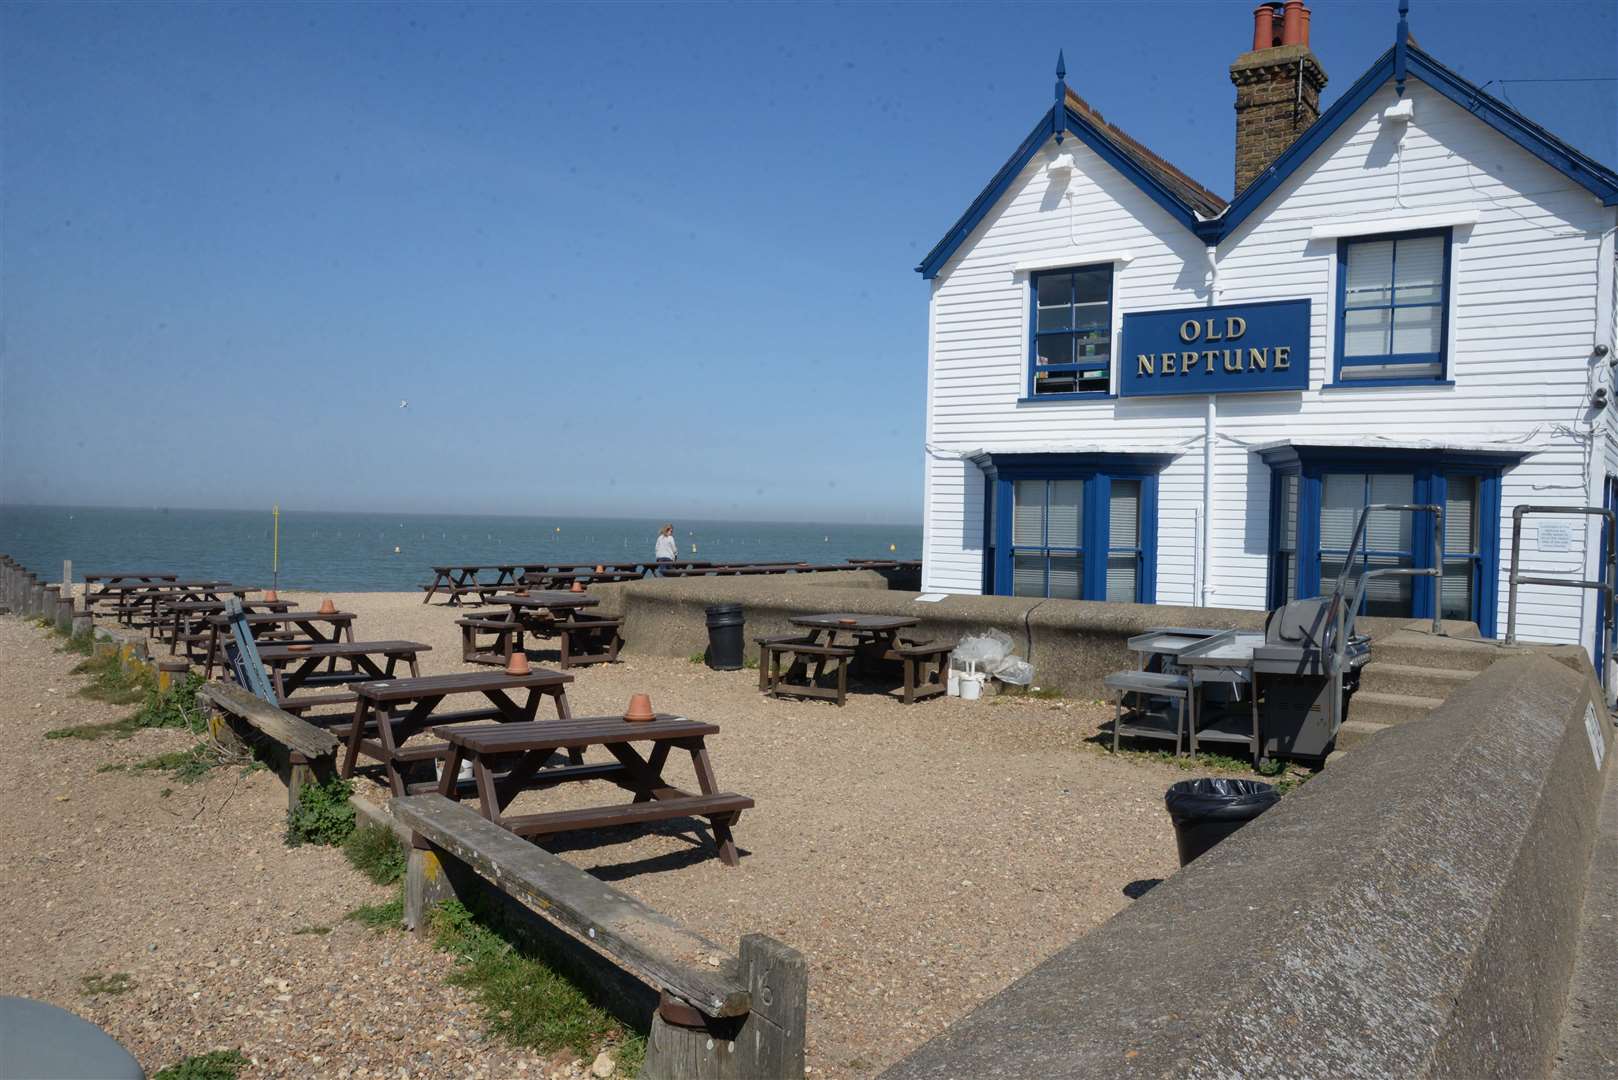 Plans for the 26-mile coastal path from Whitstable to Iwade has been approved by the environment secretary. Picture: Chris Davey